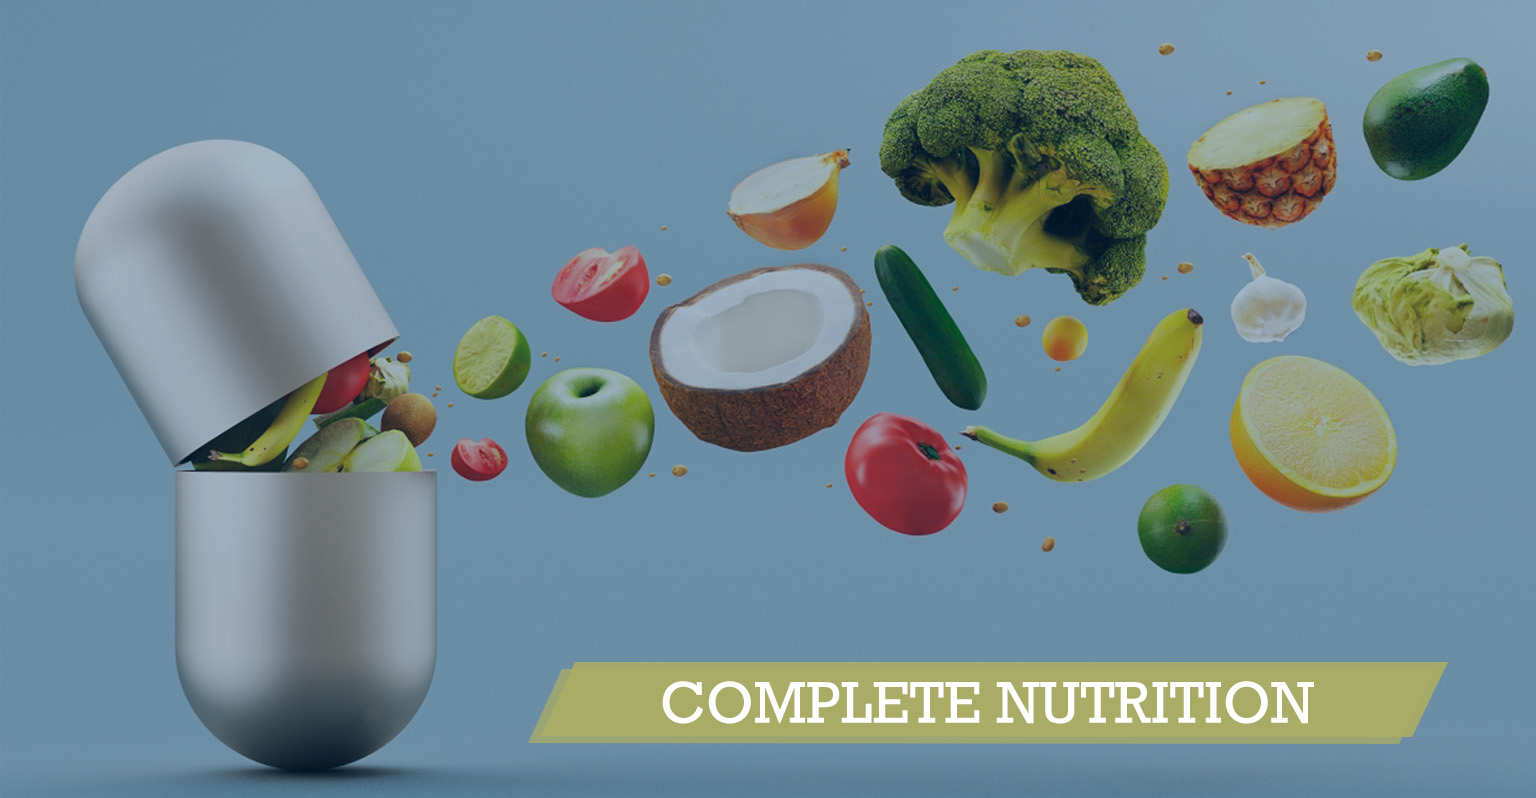 COMPLETE NUTRITION